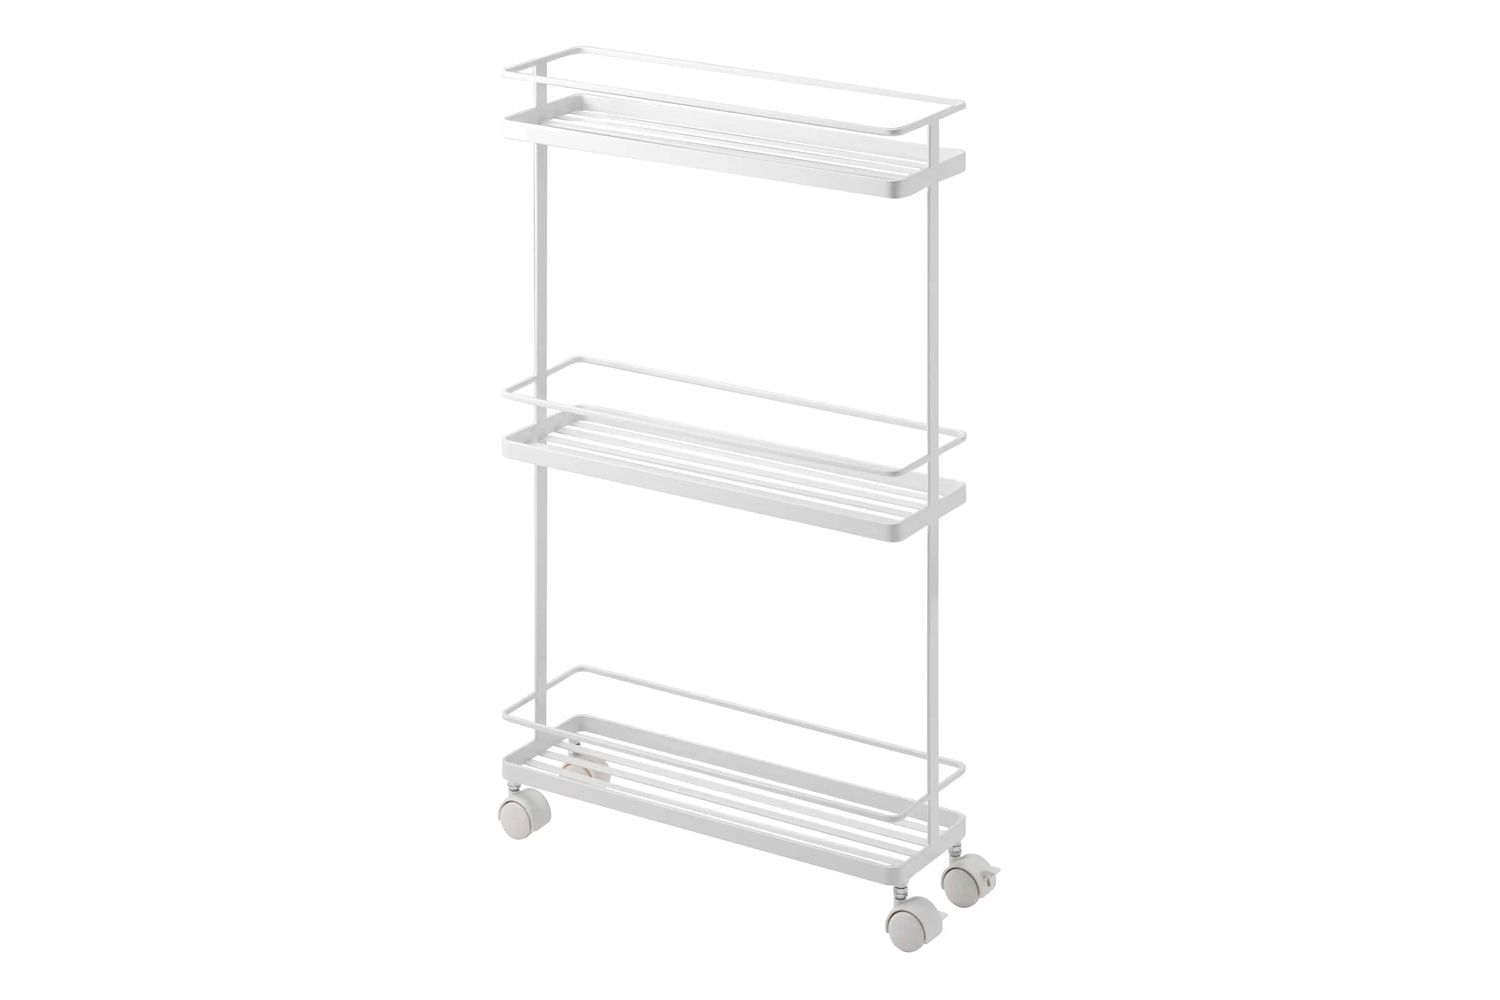 The Container Store Yamazaki Tower Rolling Cart Blanco